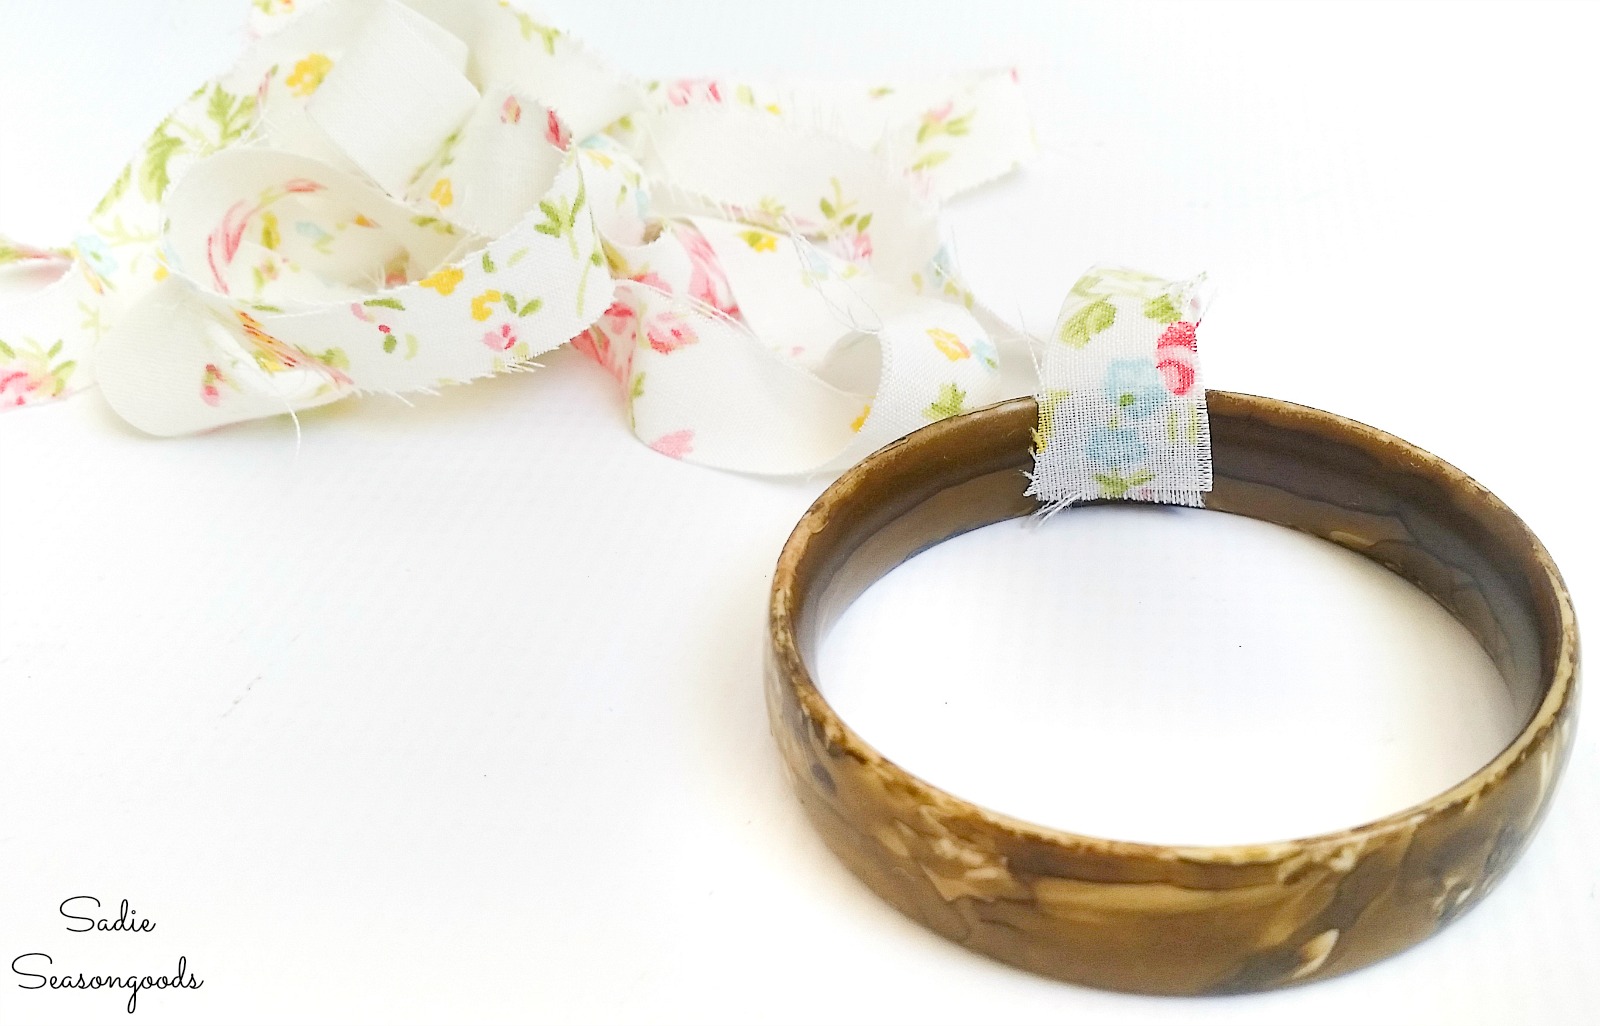 Wrapping the plastic bangles with vintage fabric